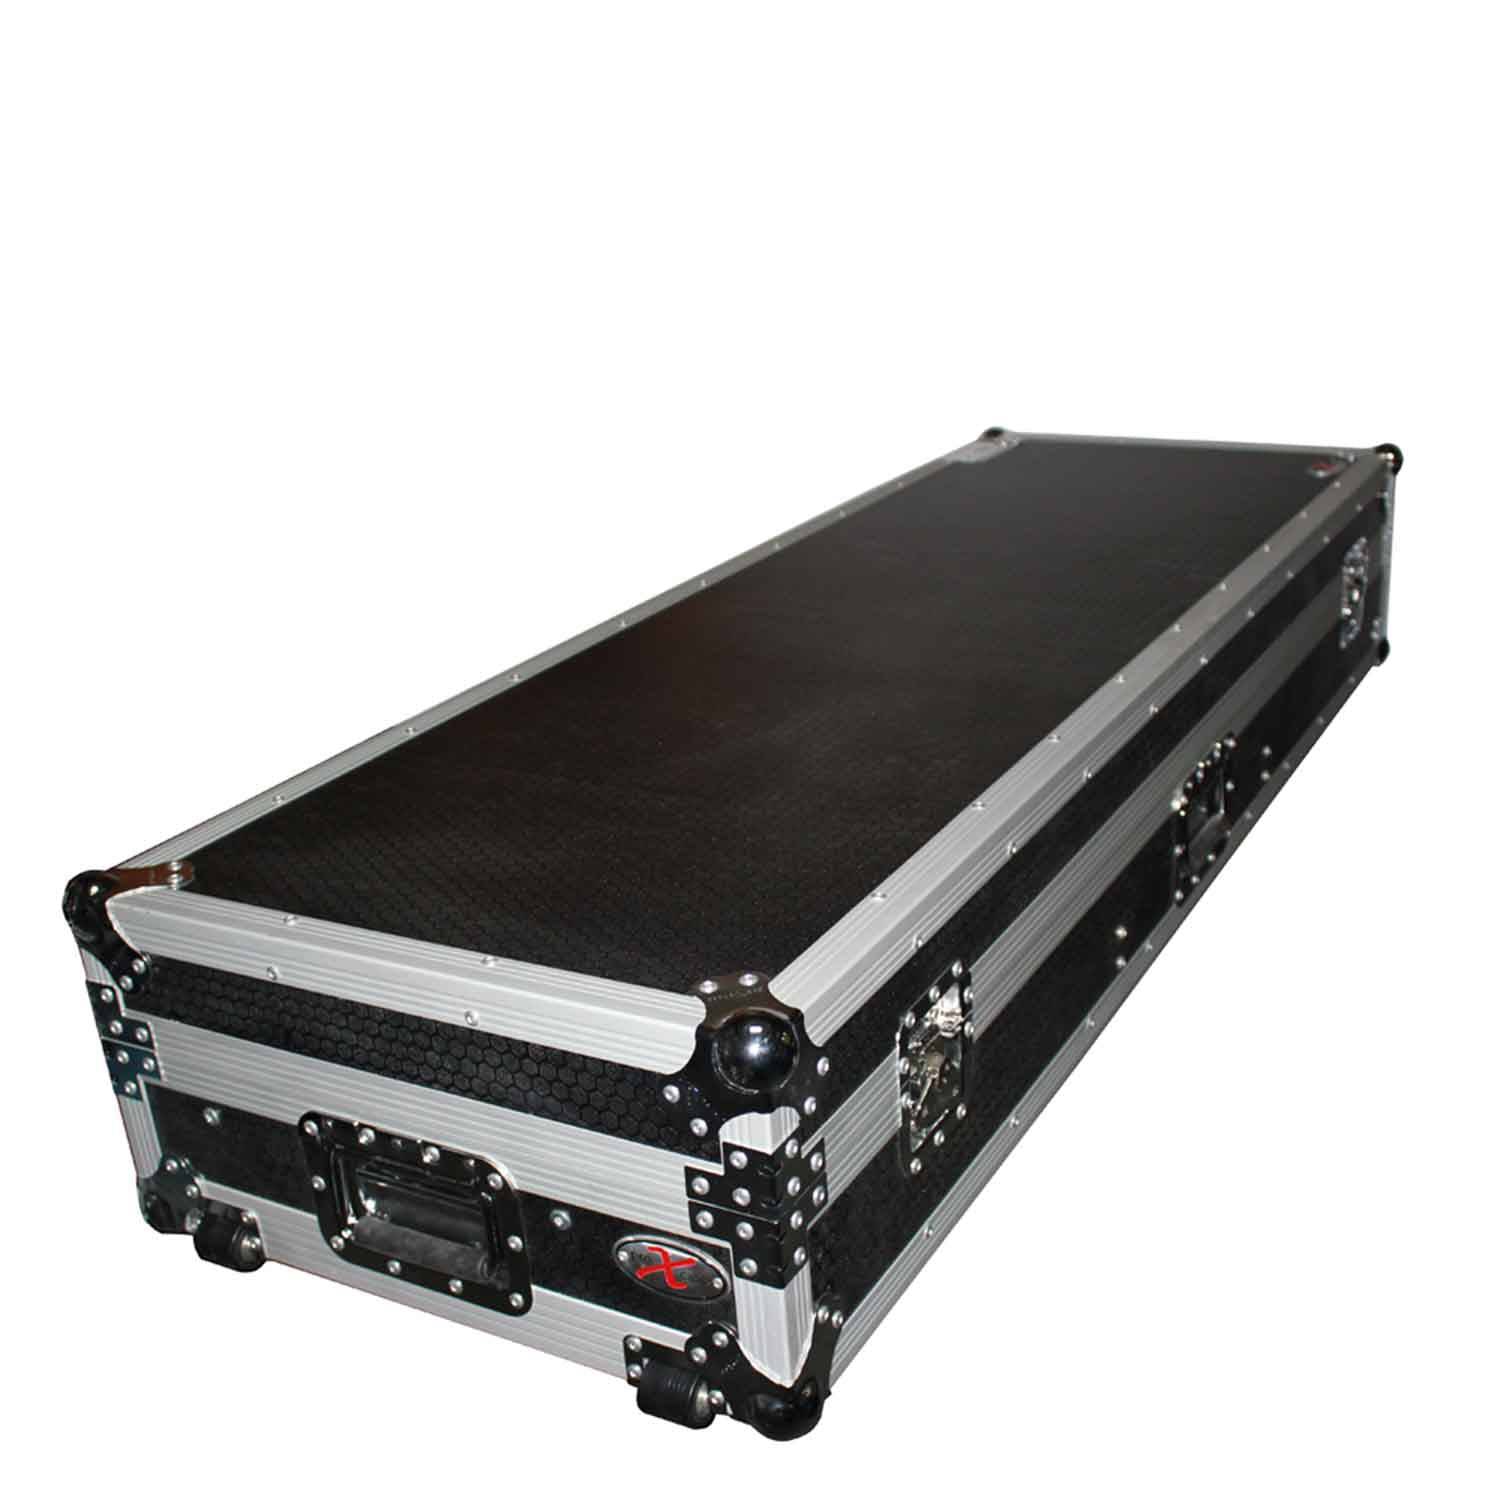 ProX XS-TMC1012WLTFSTND DJ Flight Case Coffin For 10" or 12" Mixer and 2 1200 style Turntables in Standard Mode - Hollywood DJ